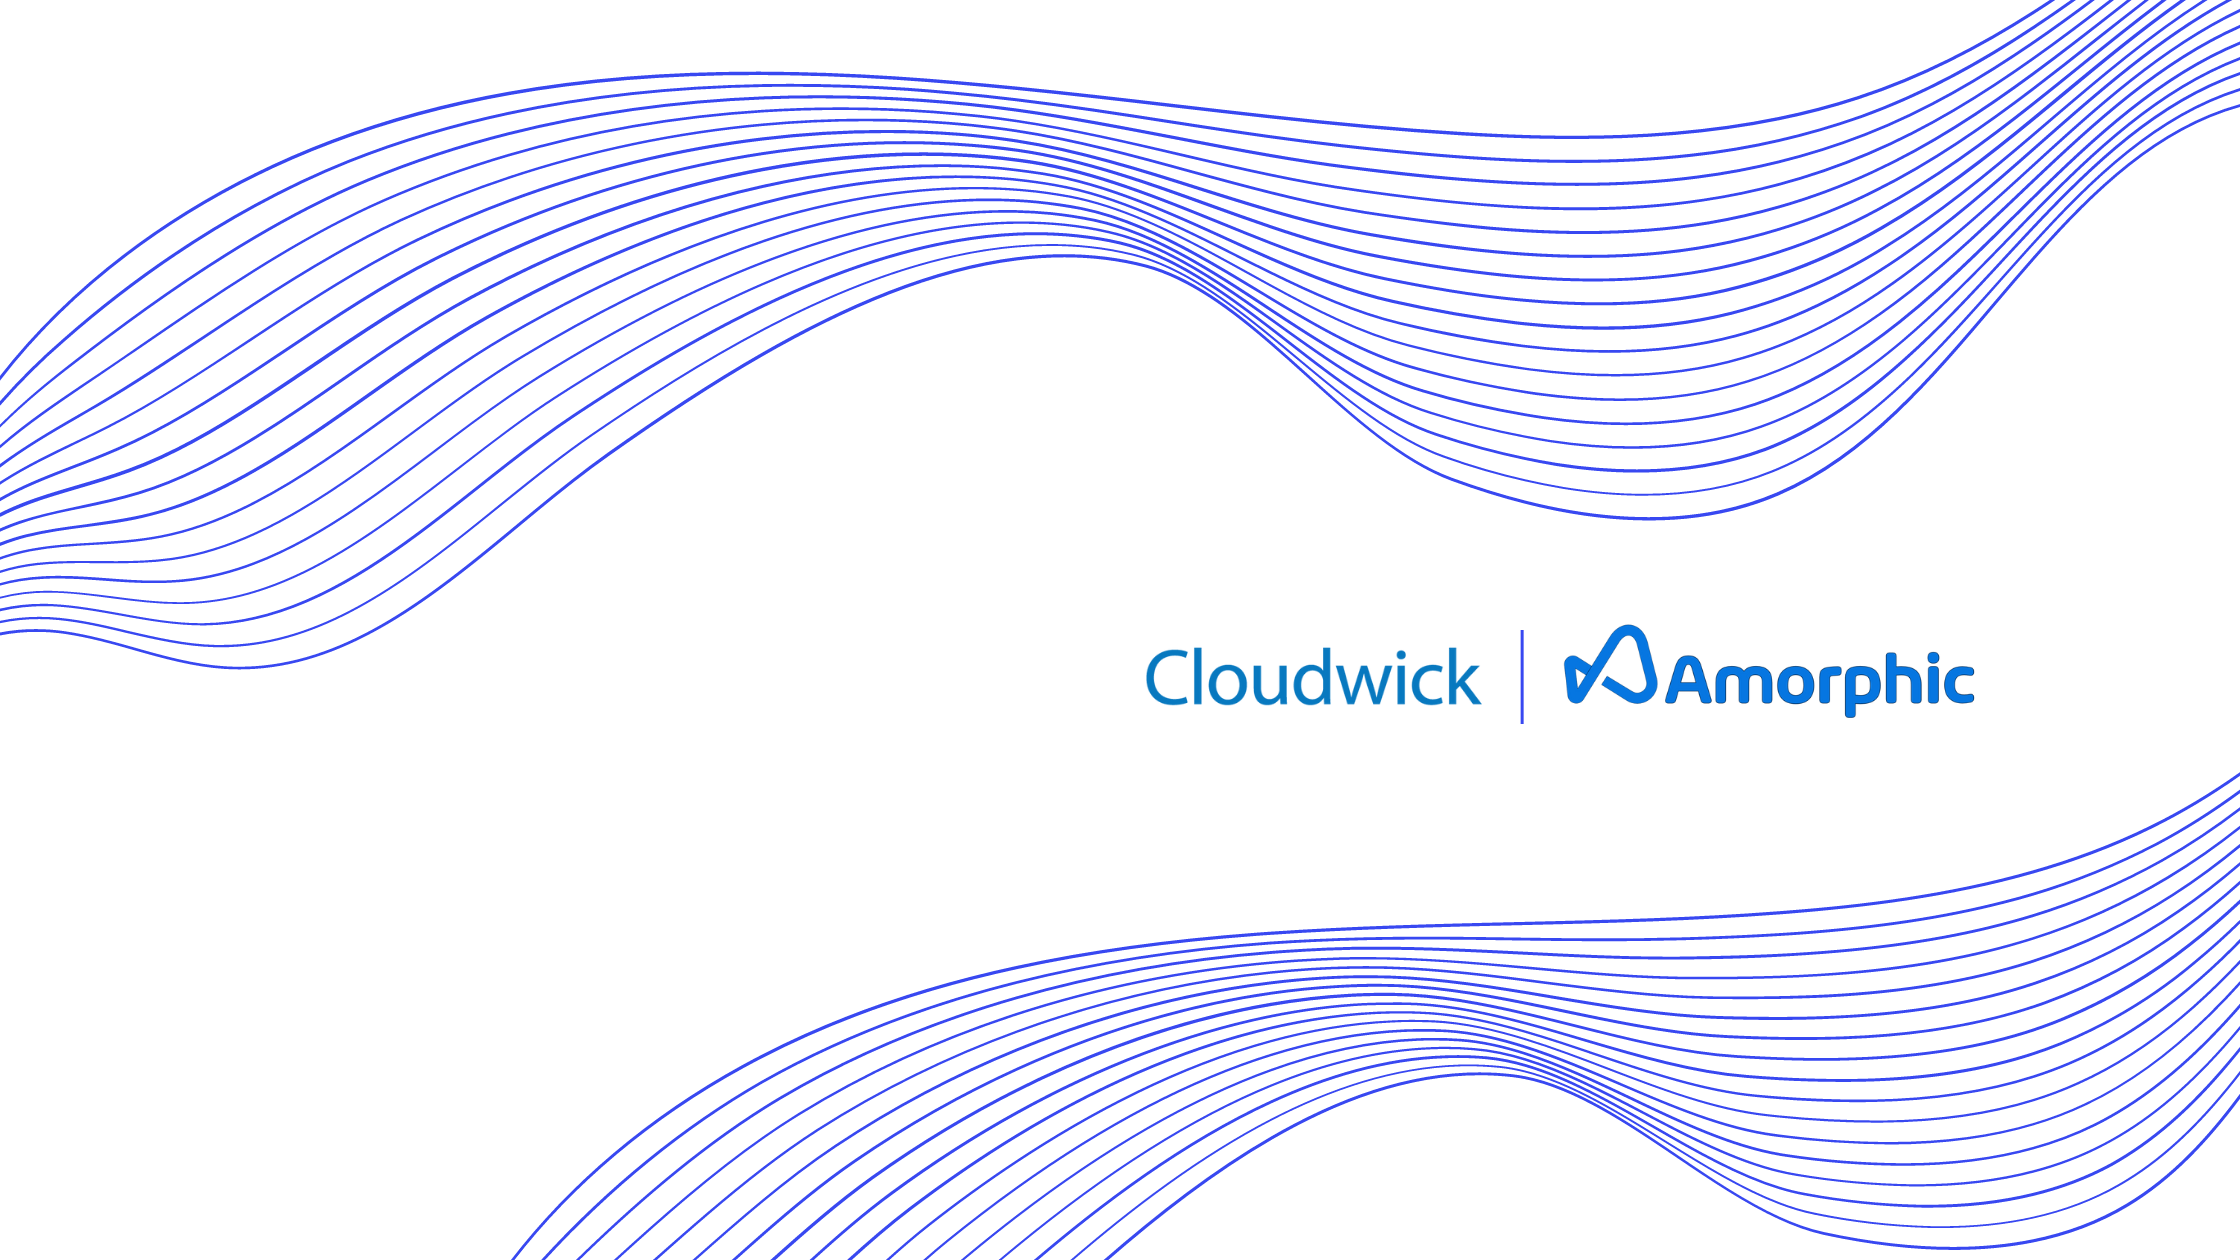 [Press Release] Cloudwick Technologies, Inc. Achieves AWS Energy Competency